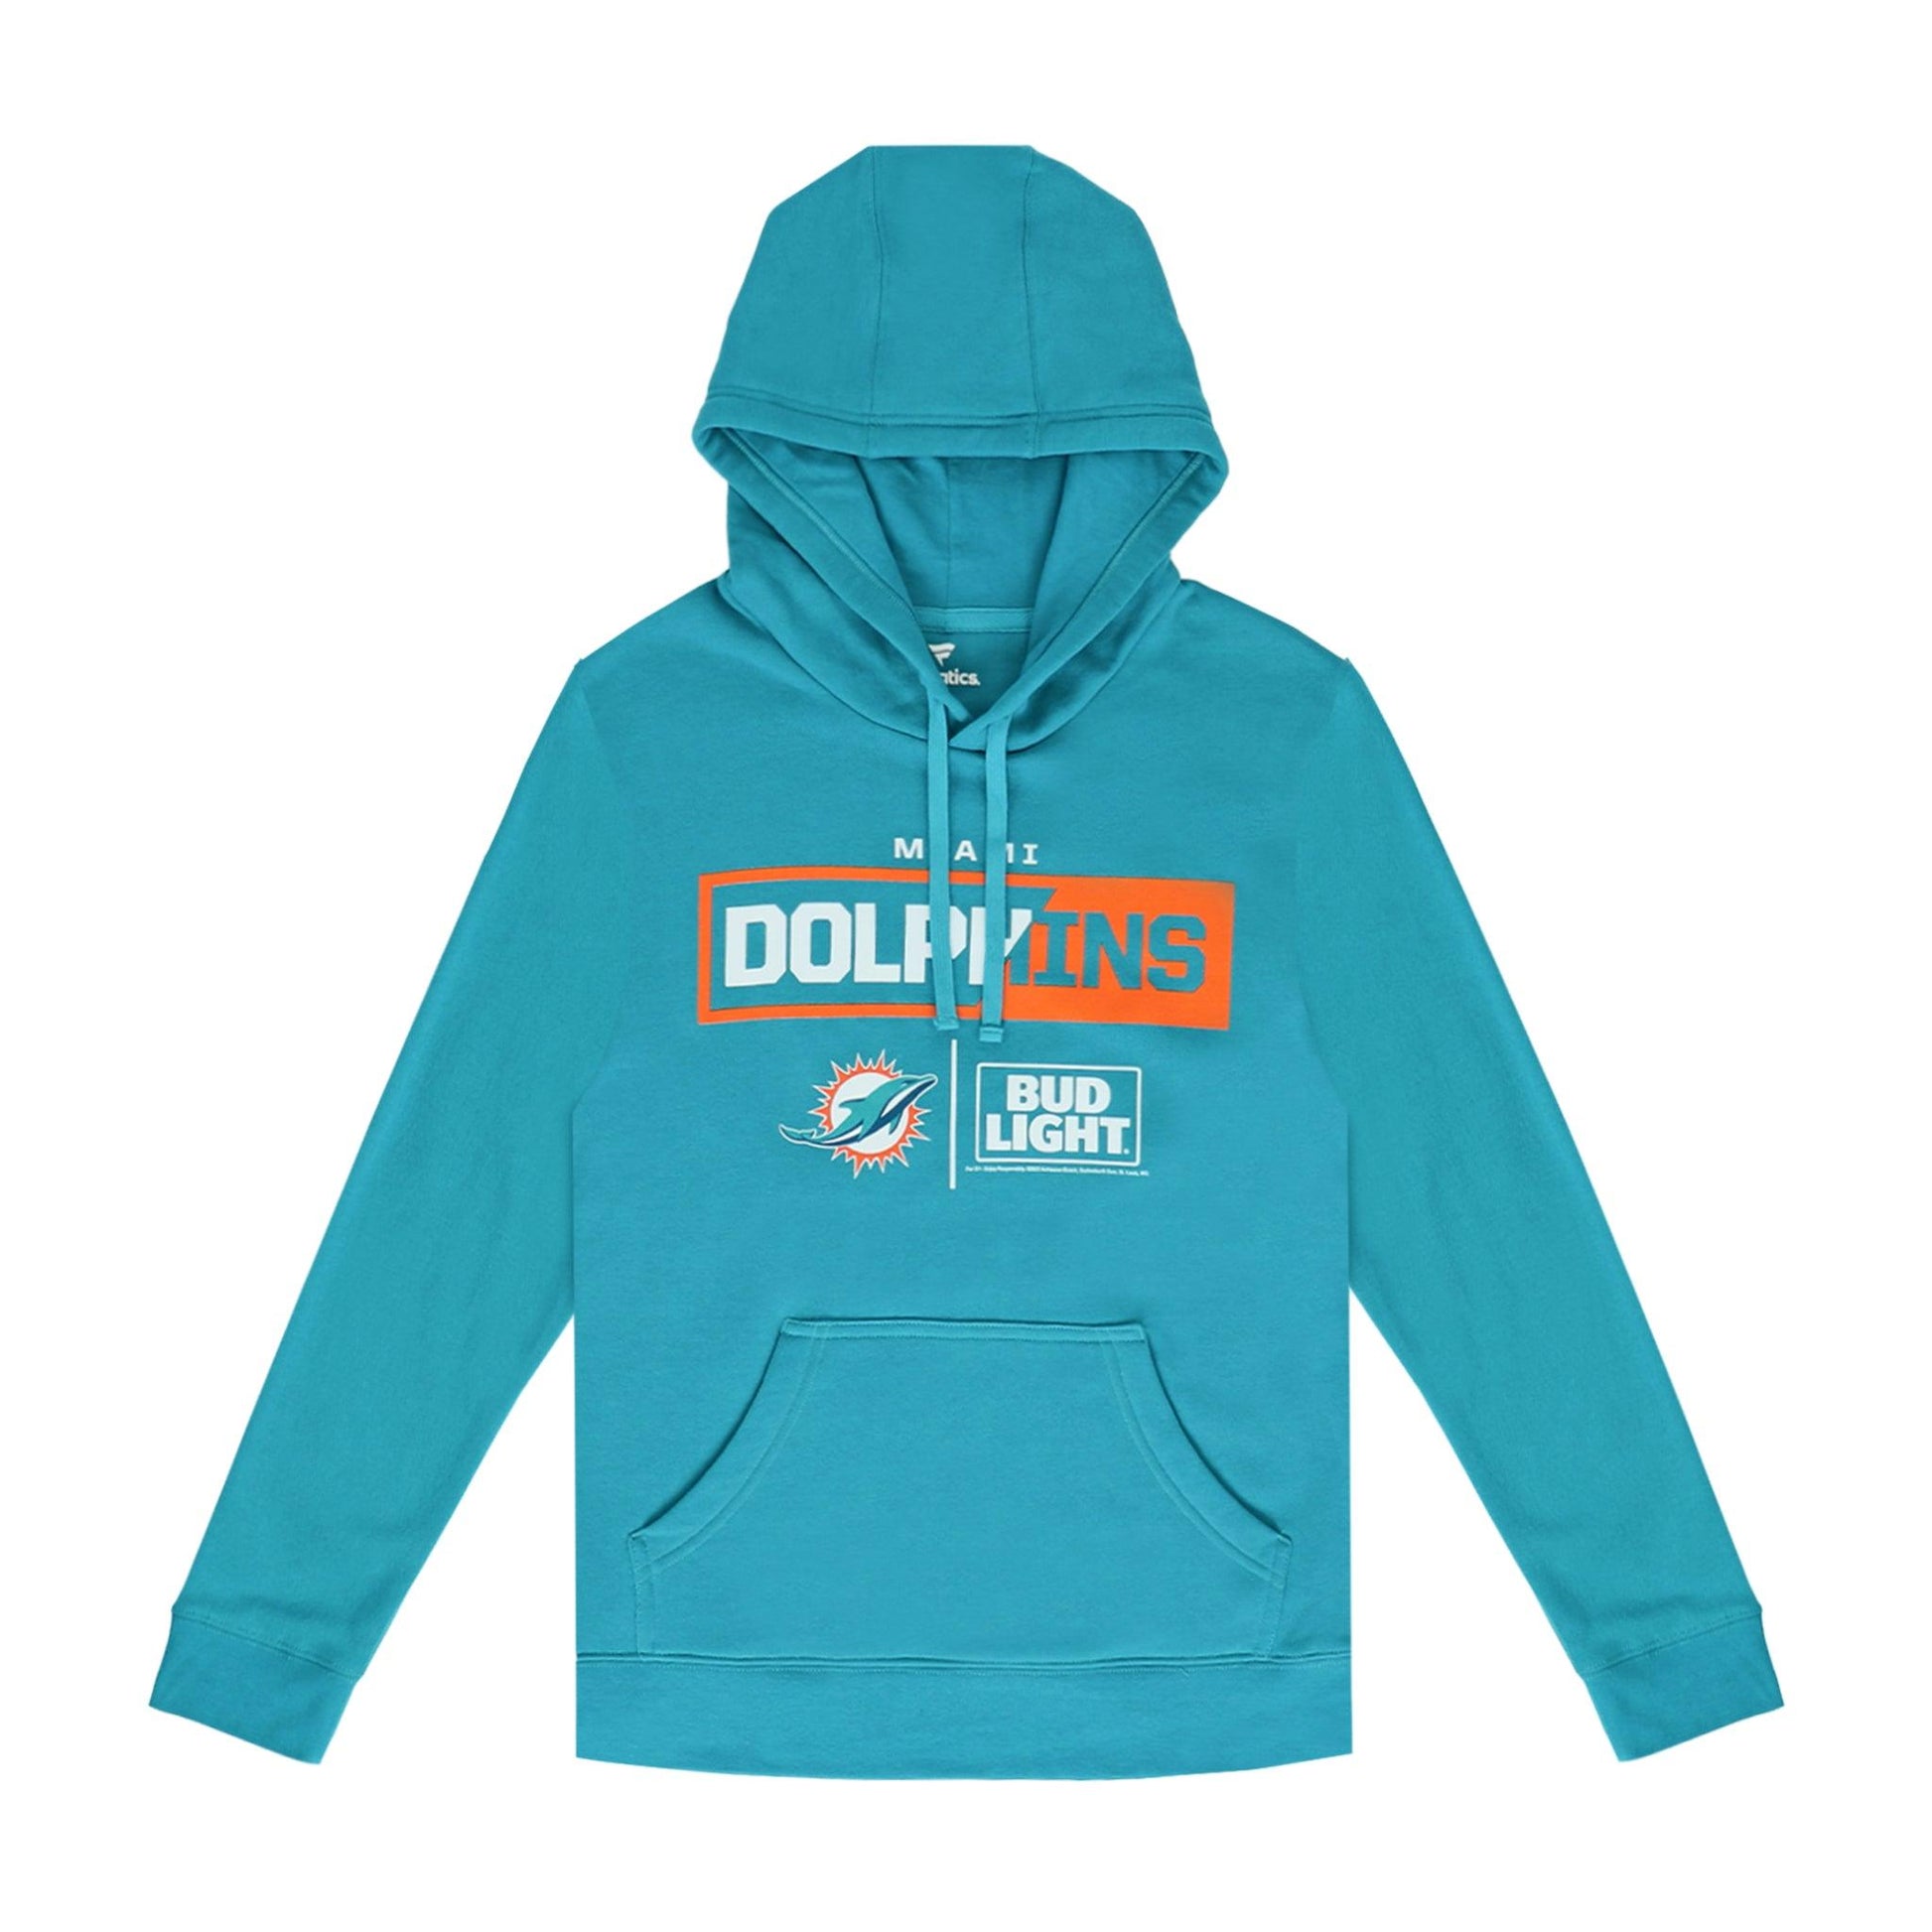 hoodie with dolphind and bud light logo